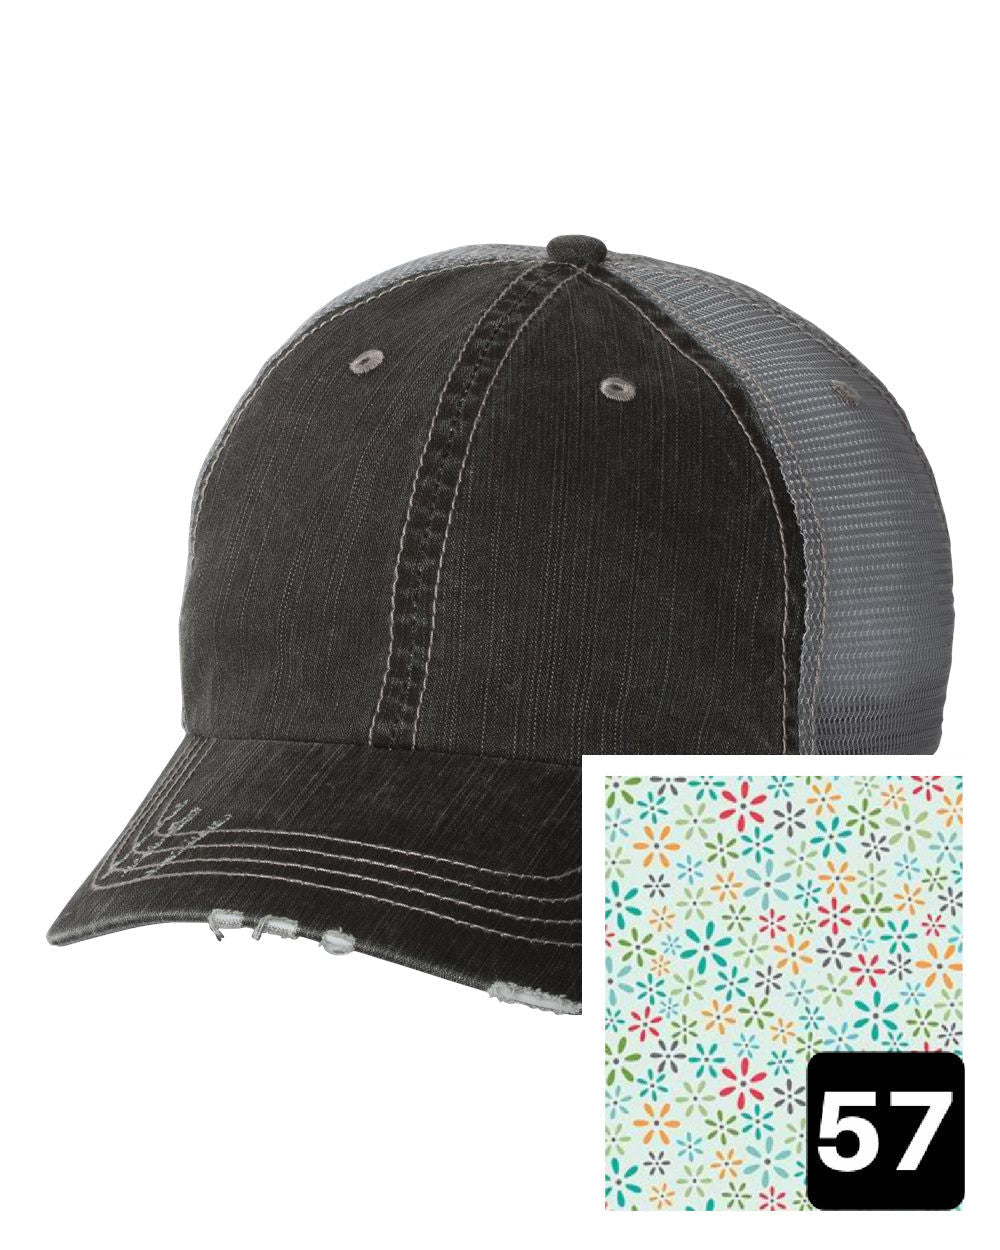 gray distressed trucker hat with white daisy on yellow fabric state of Oregon